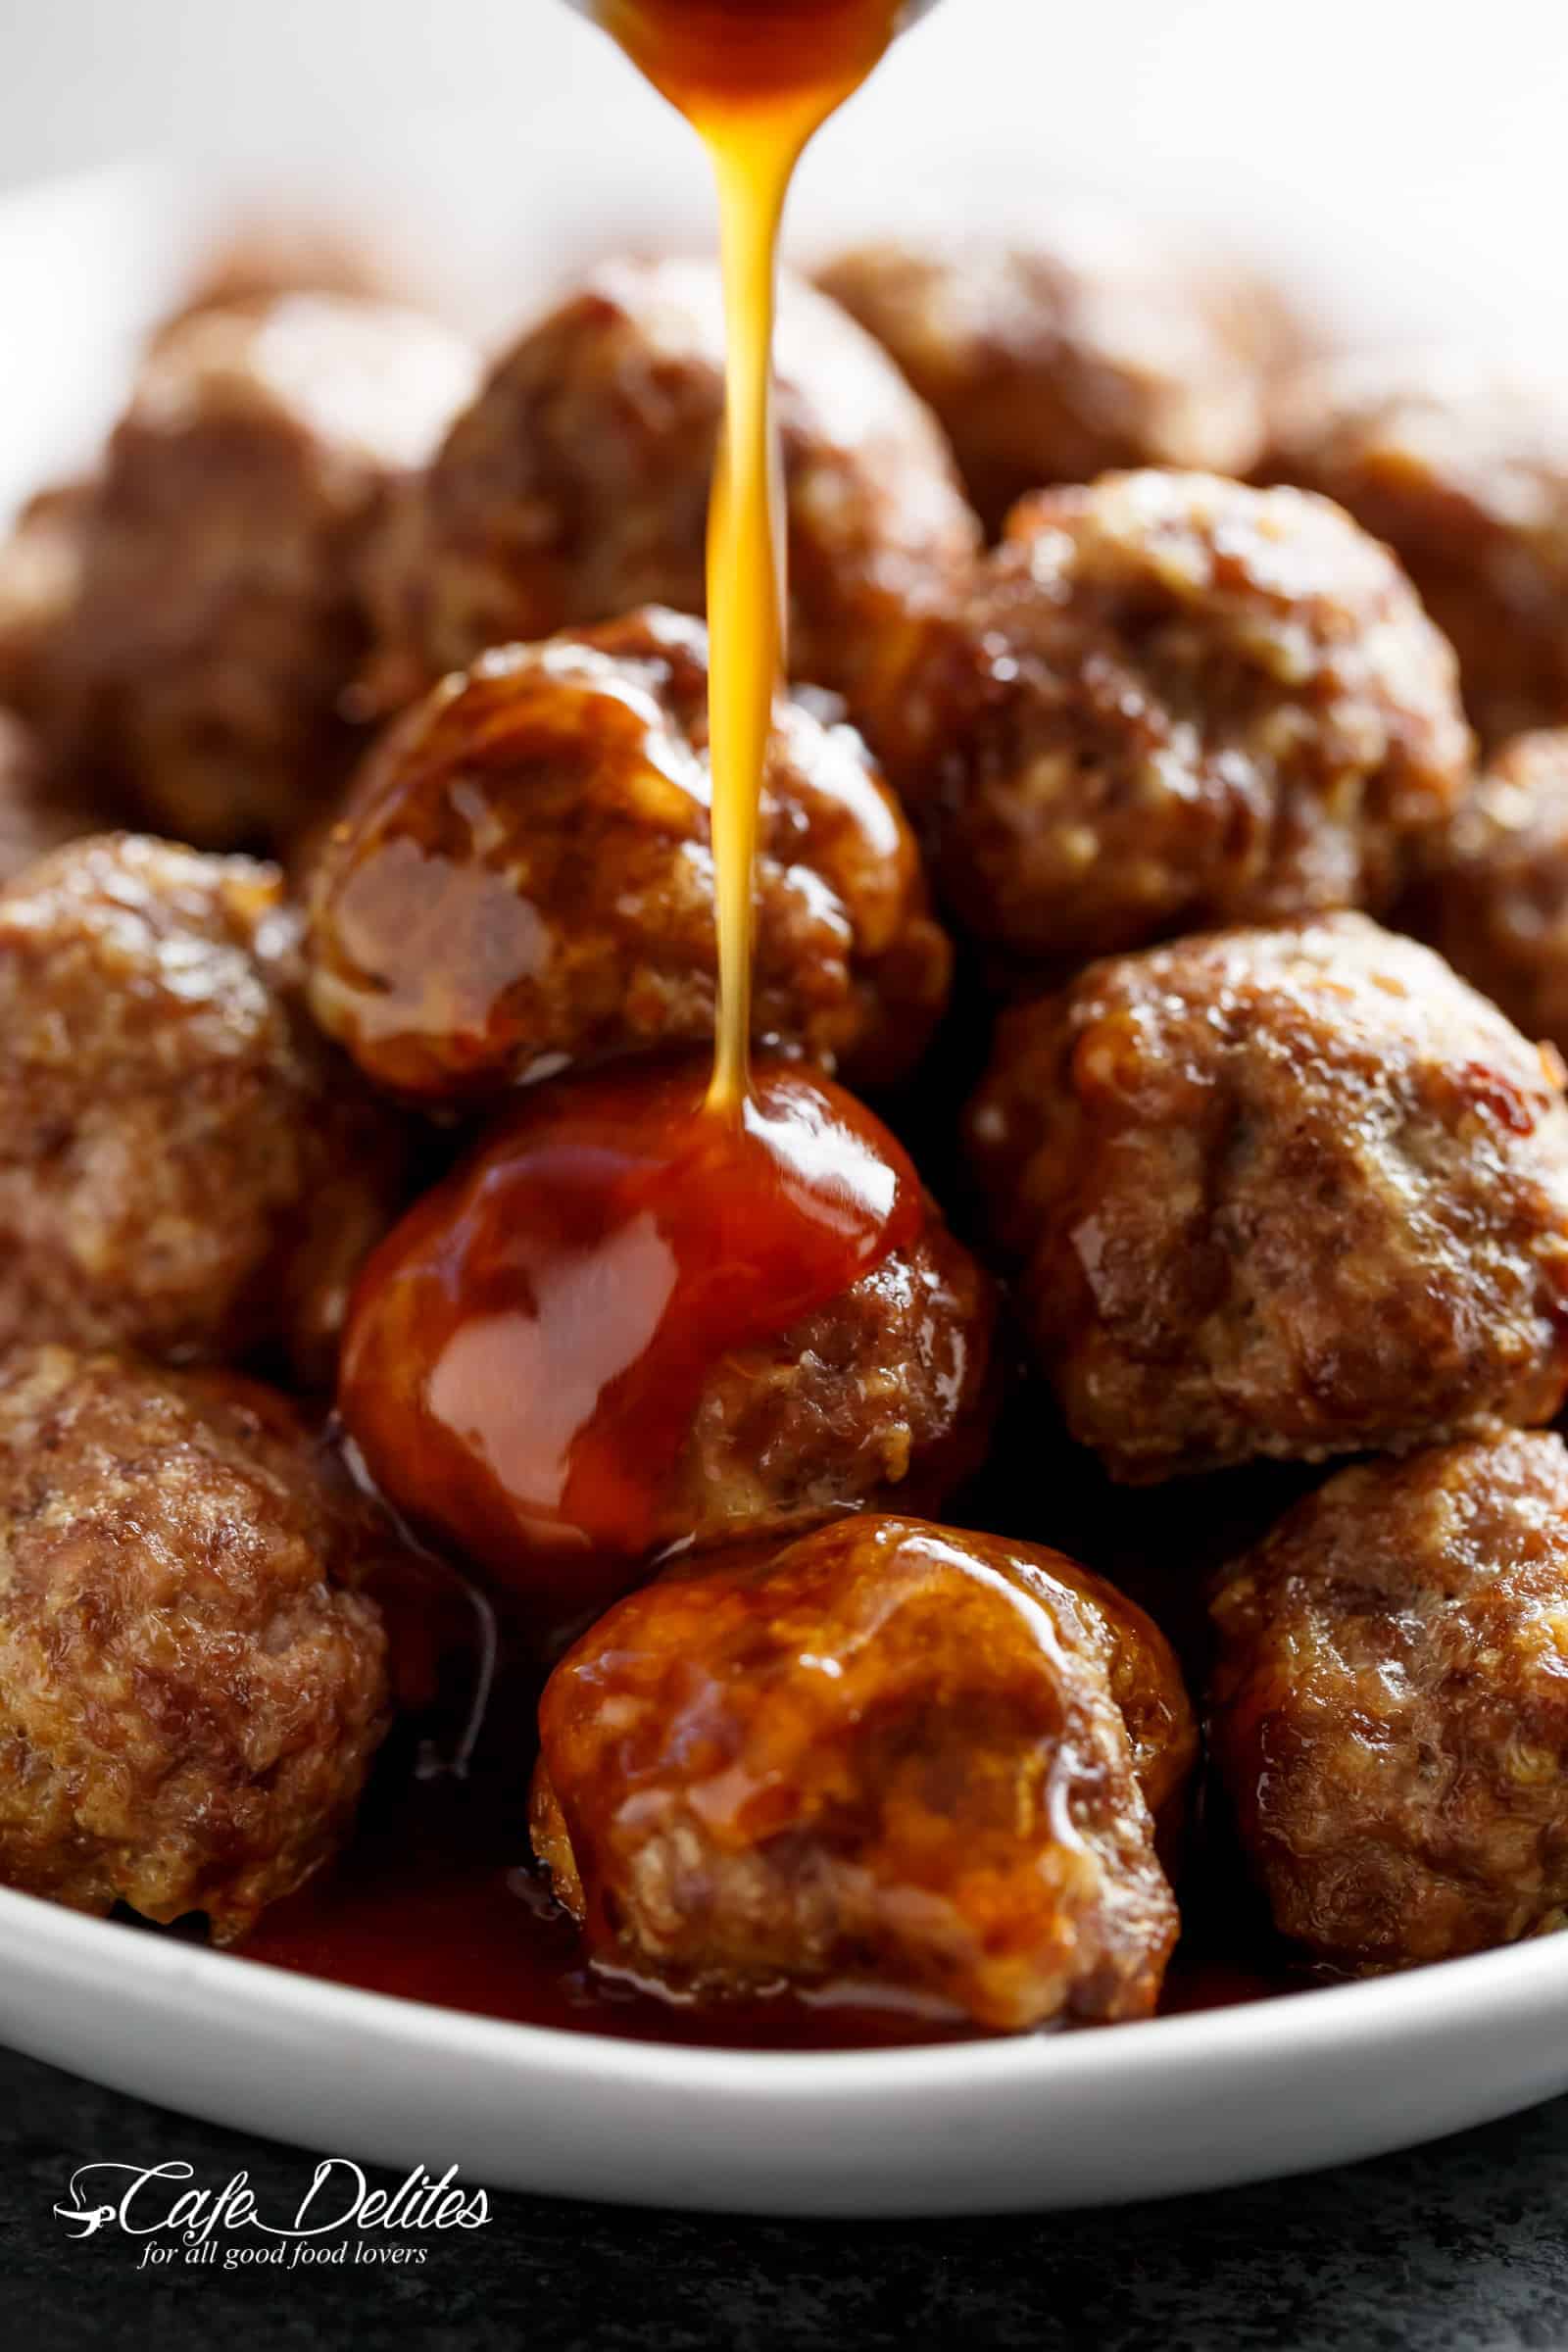 Teriyaki Beef Meatballs are so versatile, these Teriyaki Beef Meatballs can be served as a main meal with steamed rice and veggies OR as an appetizer! | cafedelites.com